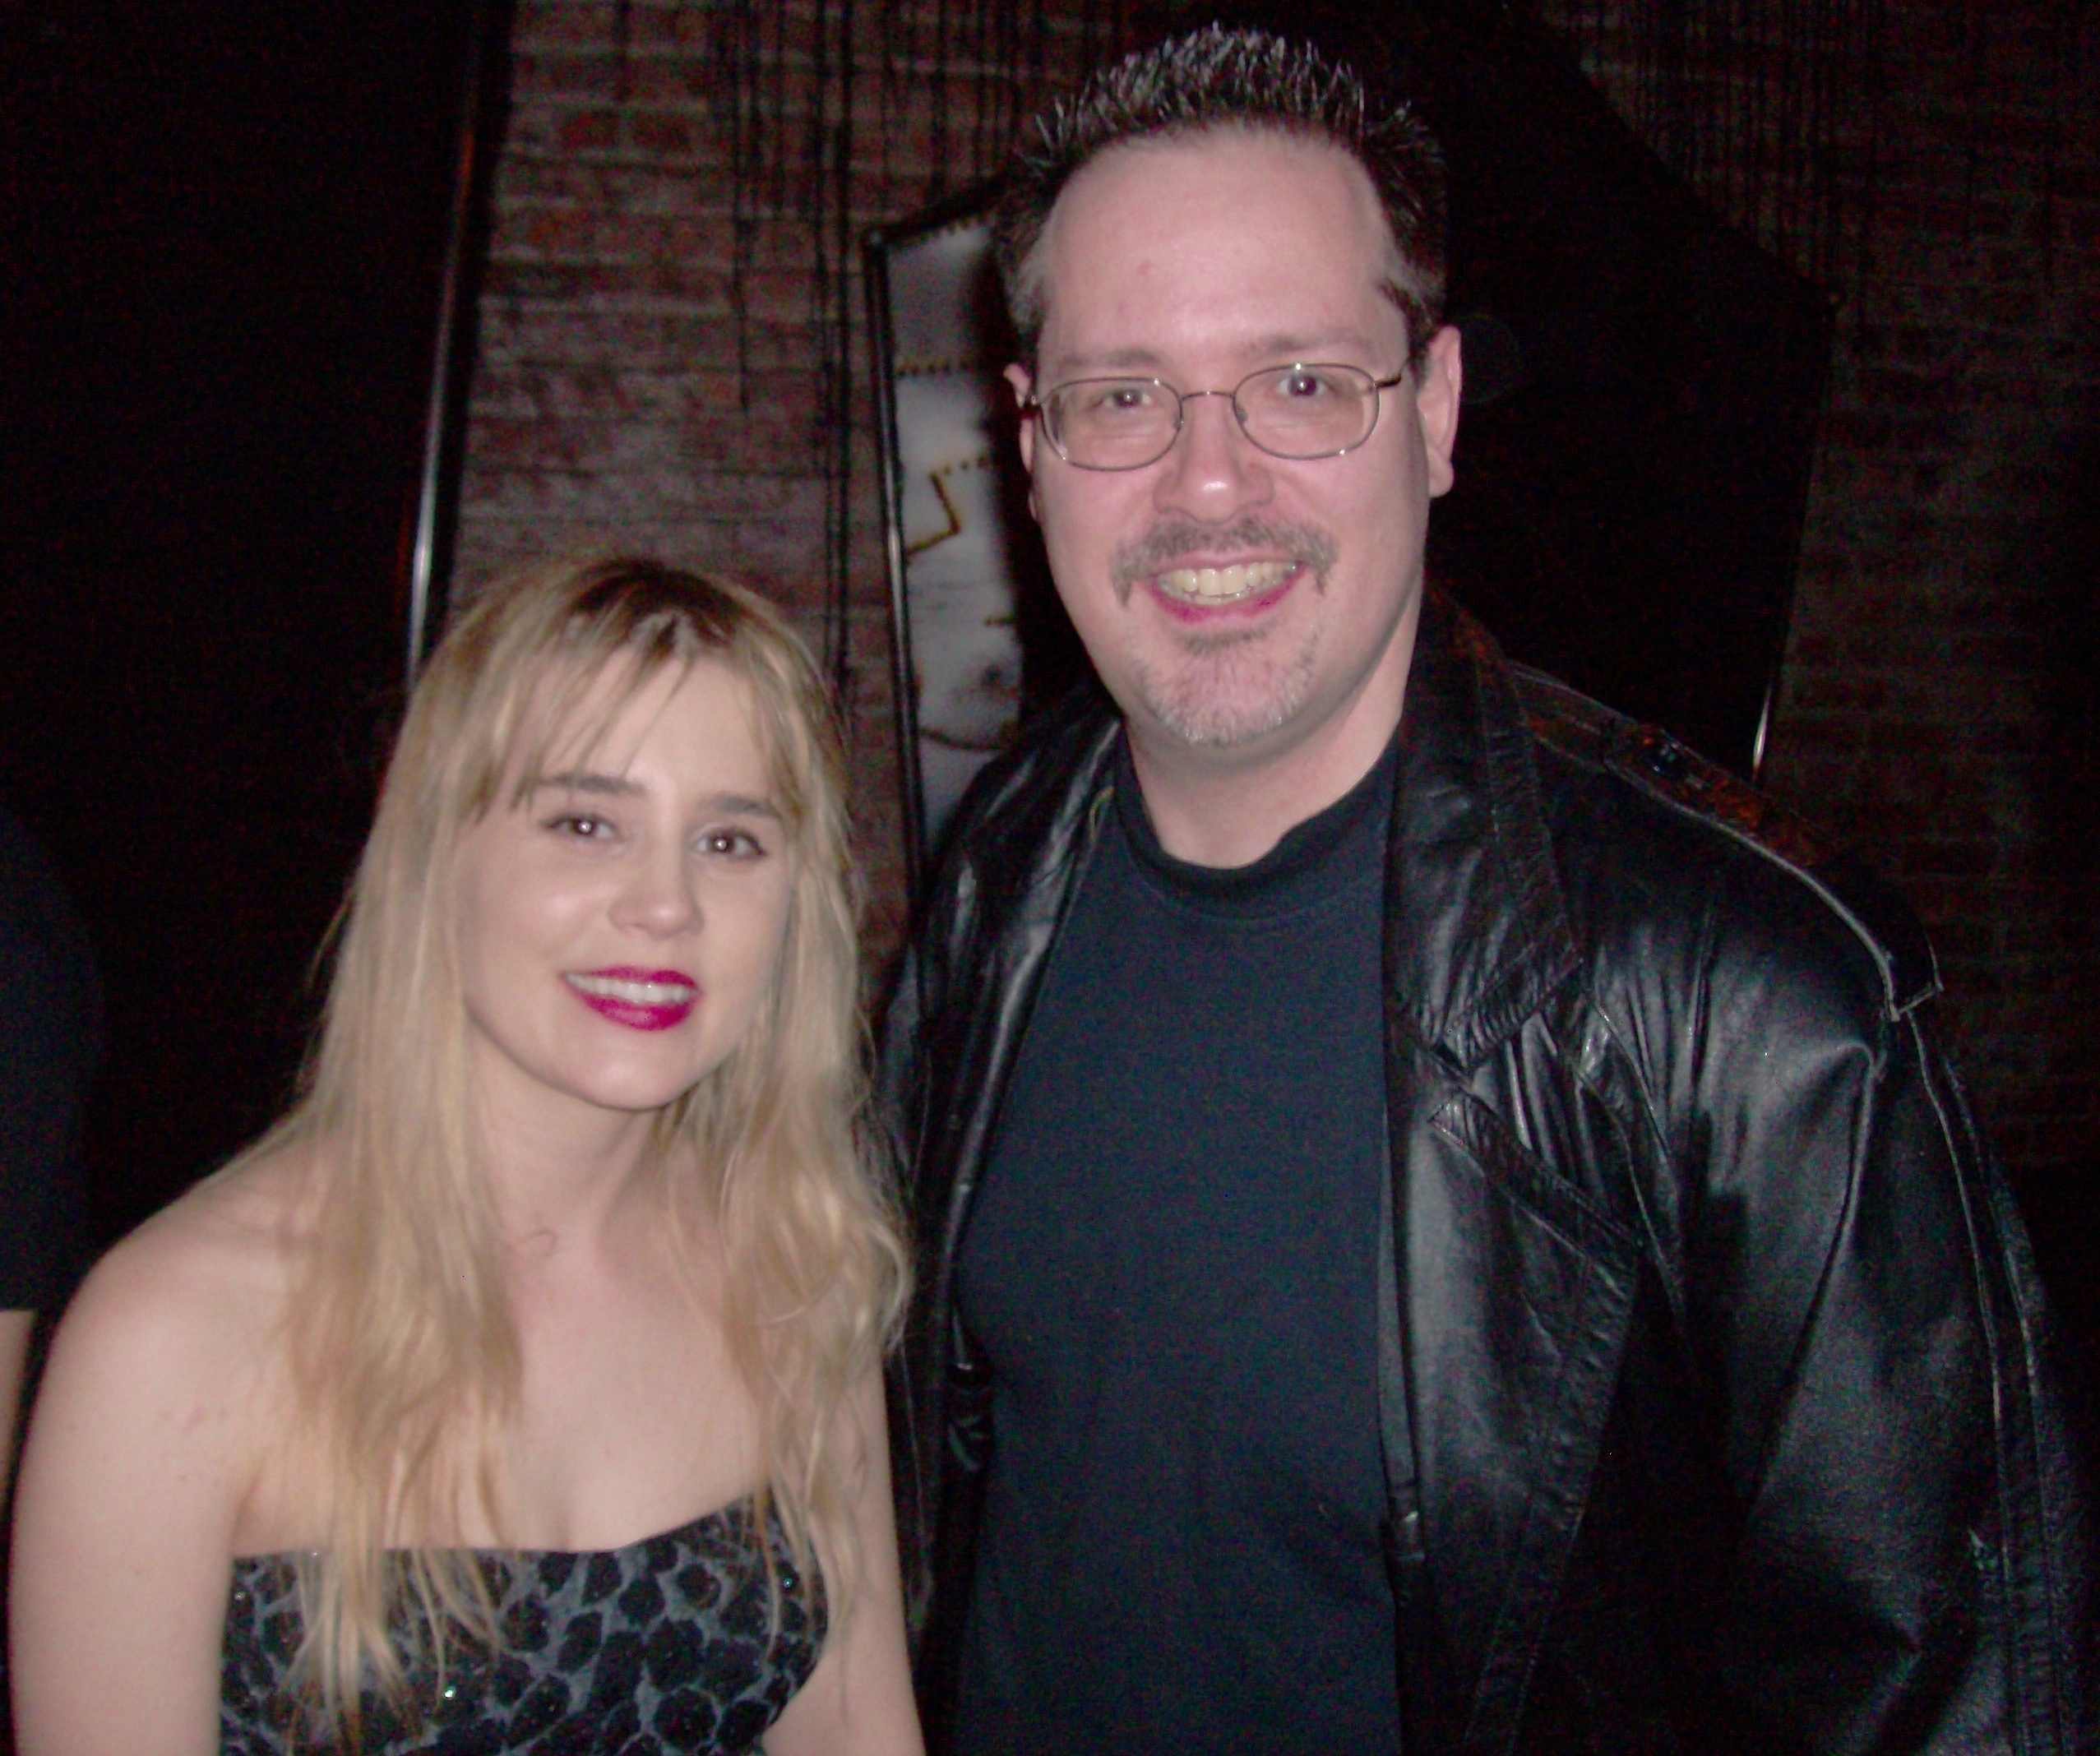 Glen Baisley and Alison Lohman at the Ghost Rider: Spirit of Vengeance VIP party hosted by Fangoria Magazine.